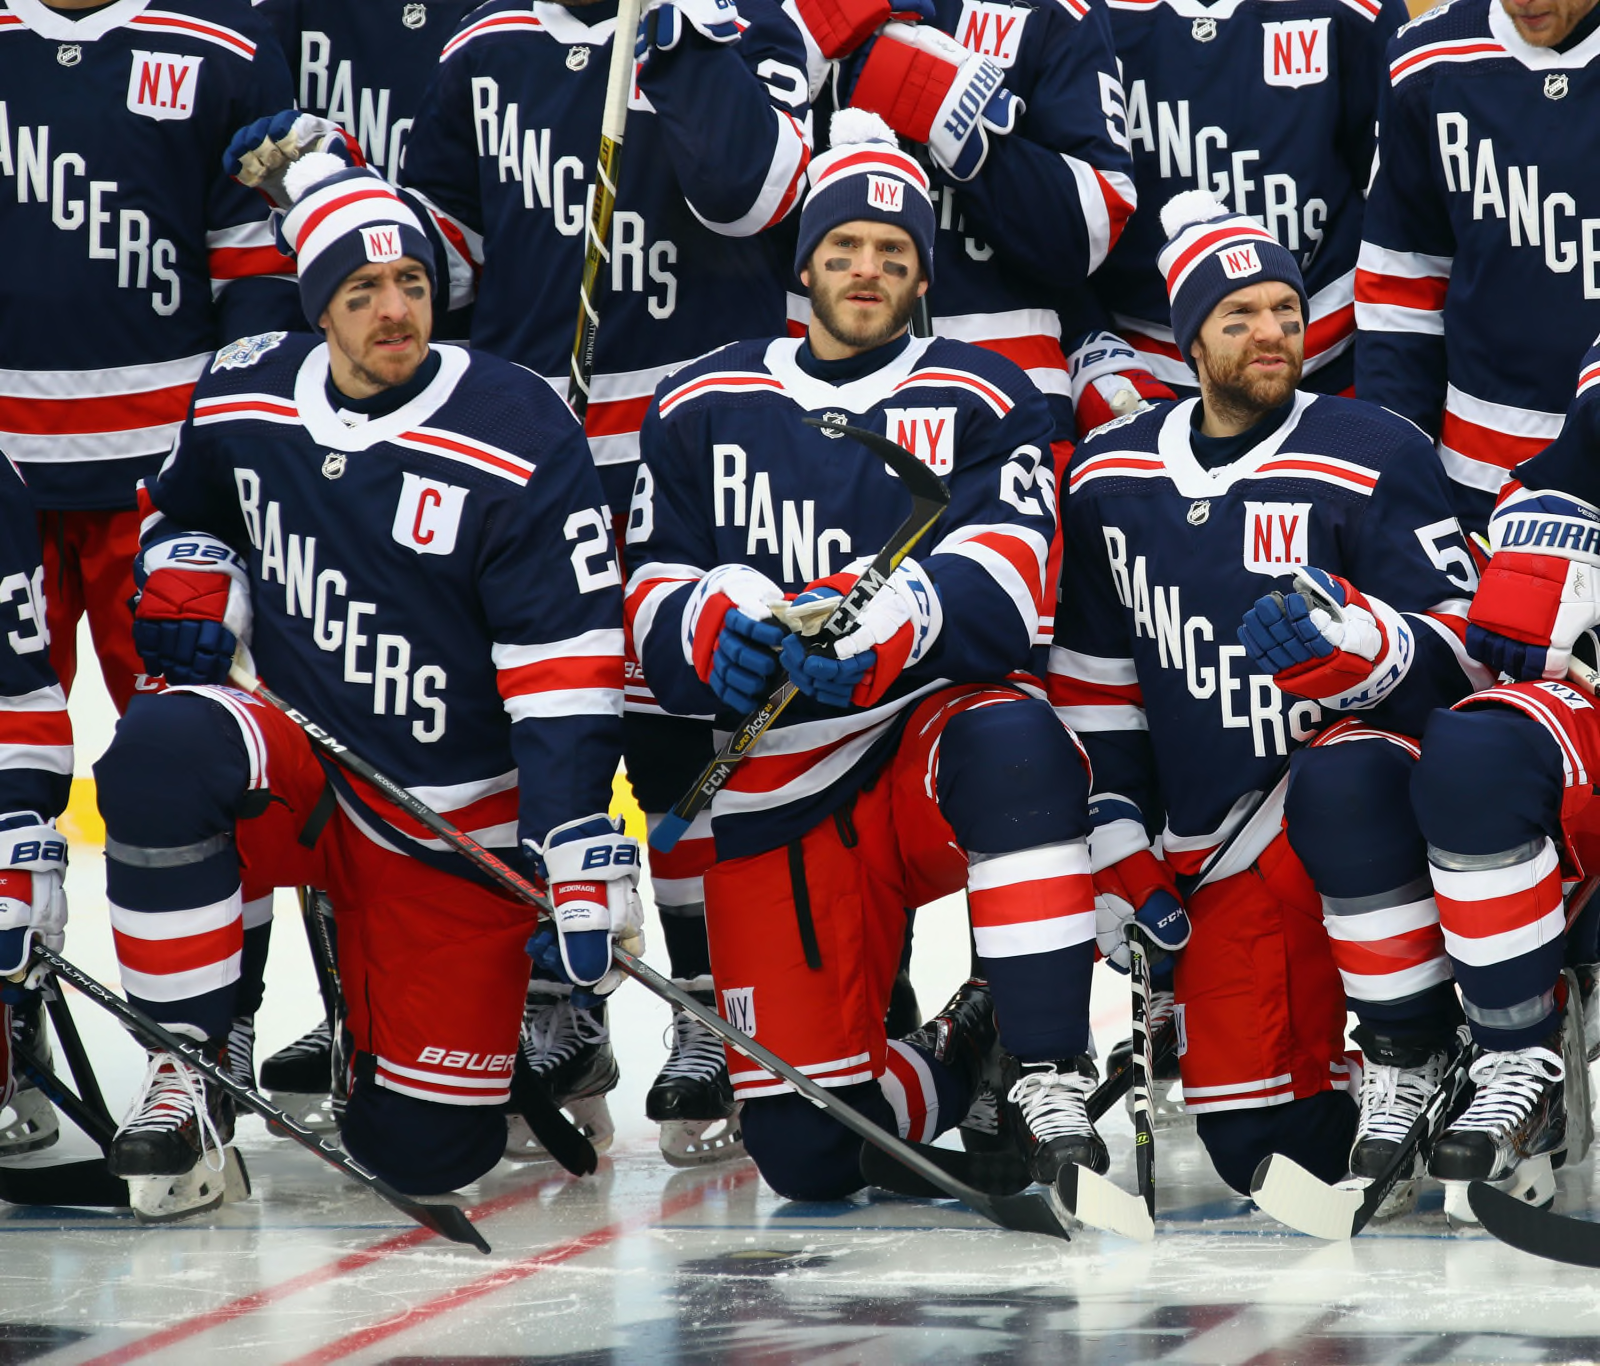 Why Are The New York Rangers The Road Team In The 2018 Winter Classic?